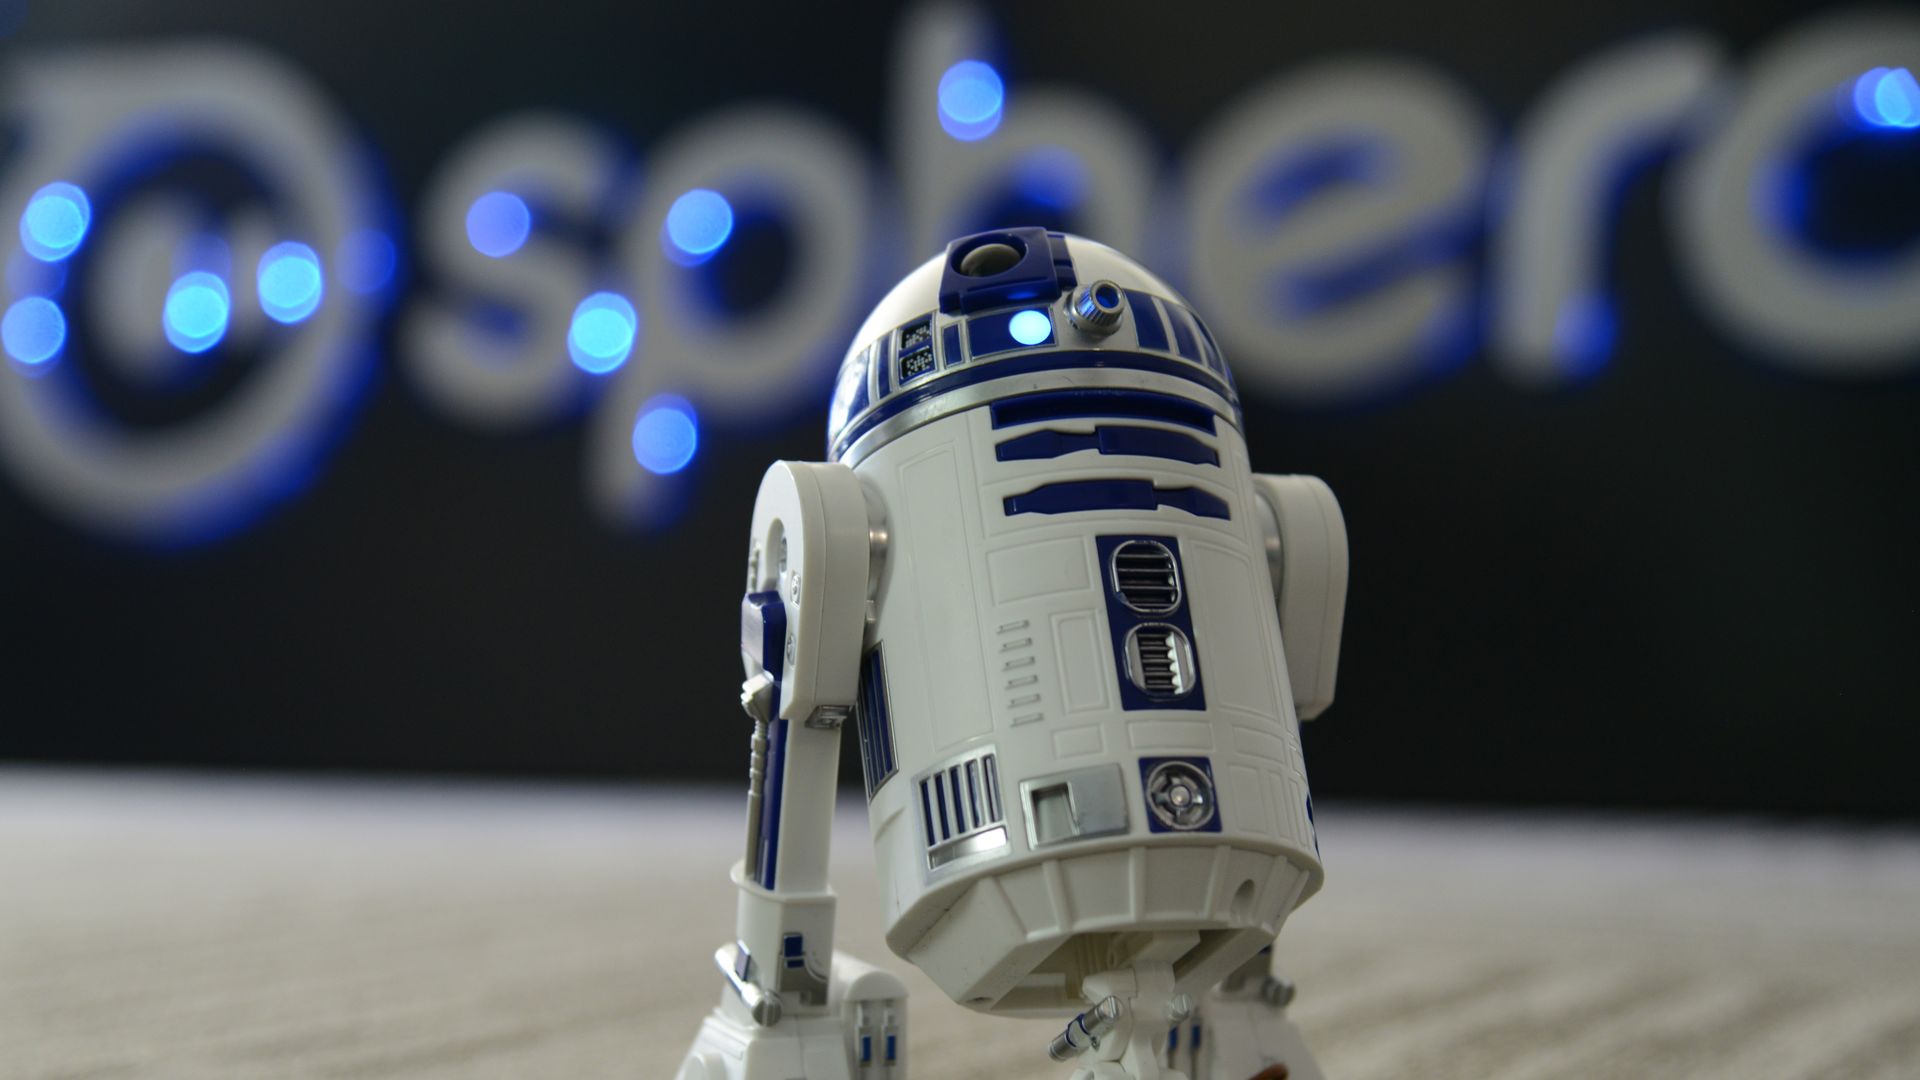 A StarWars' R2-D2 connected toy robot created by Sphere. Photographed at the Sphero campus in Boulder, Colorado on December 1, 2017. Sphero specializes in connected robotic toys. 